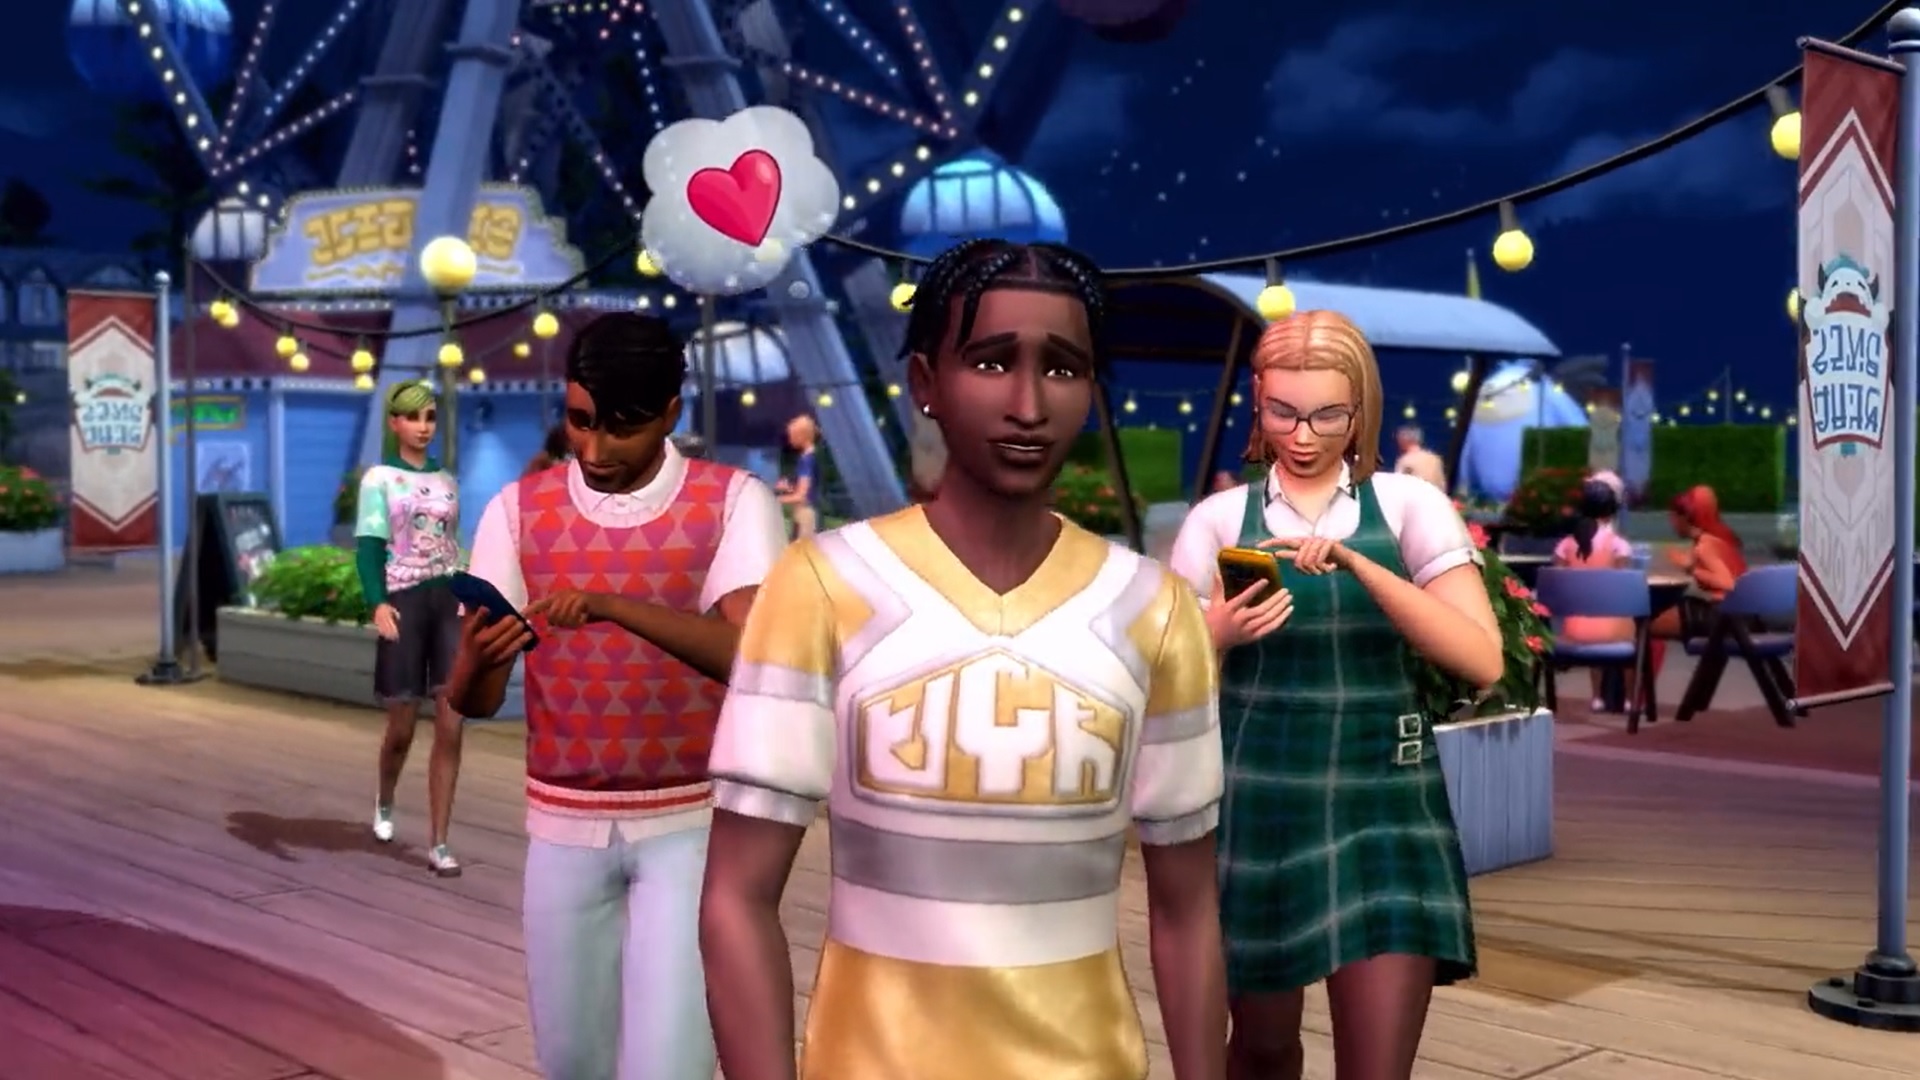 You can woohoo on the Ferris wheel in The Sims 4 High School expansion, if  that's what you're into